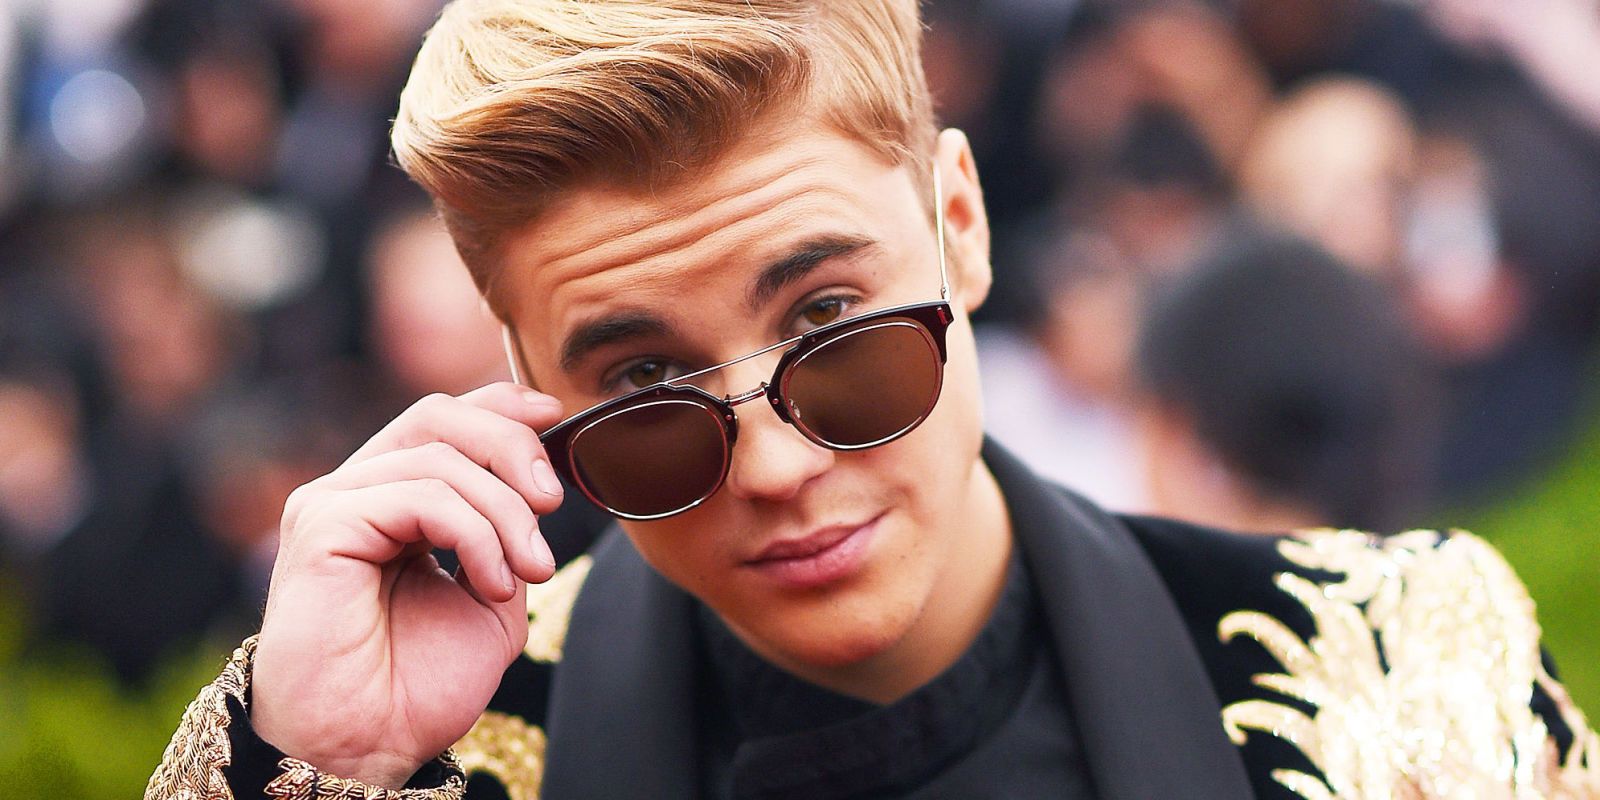 Justin Bieber has cancelled the remainder of his Purpose world tour |  SHEmazing!